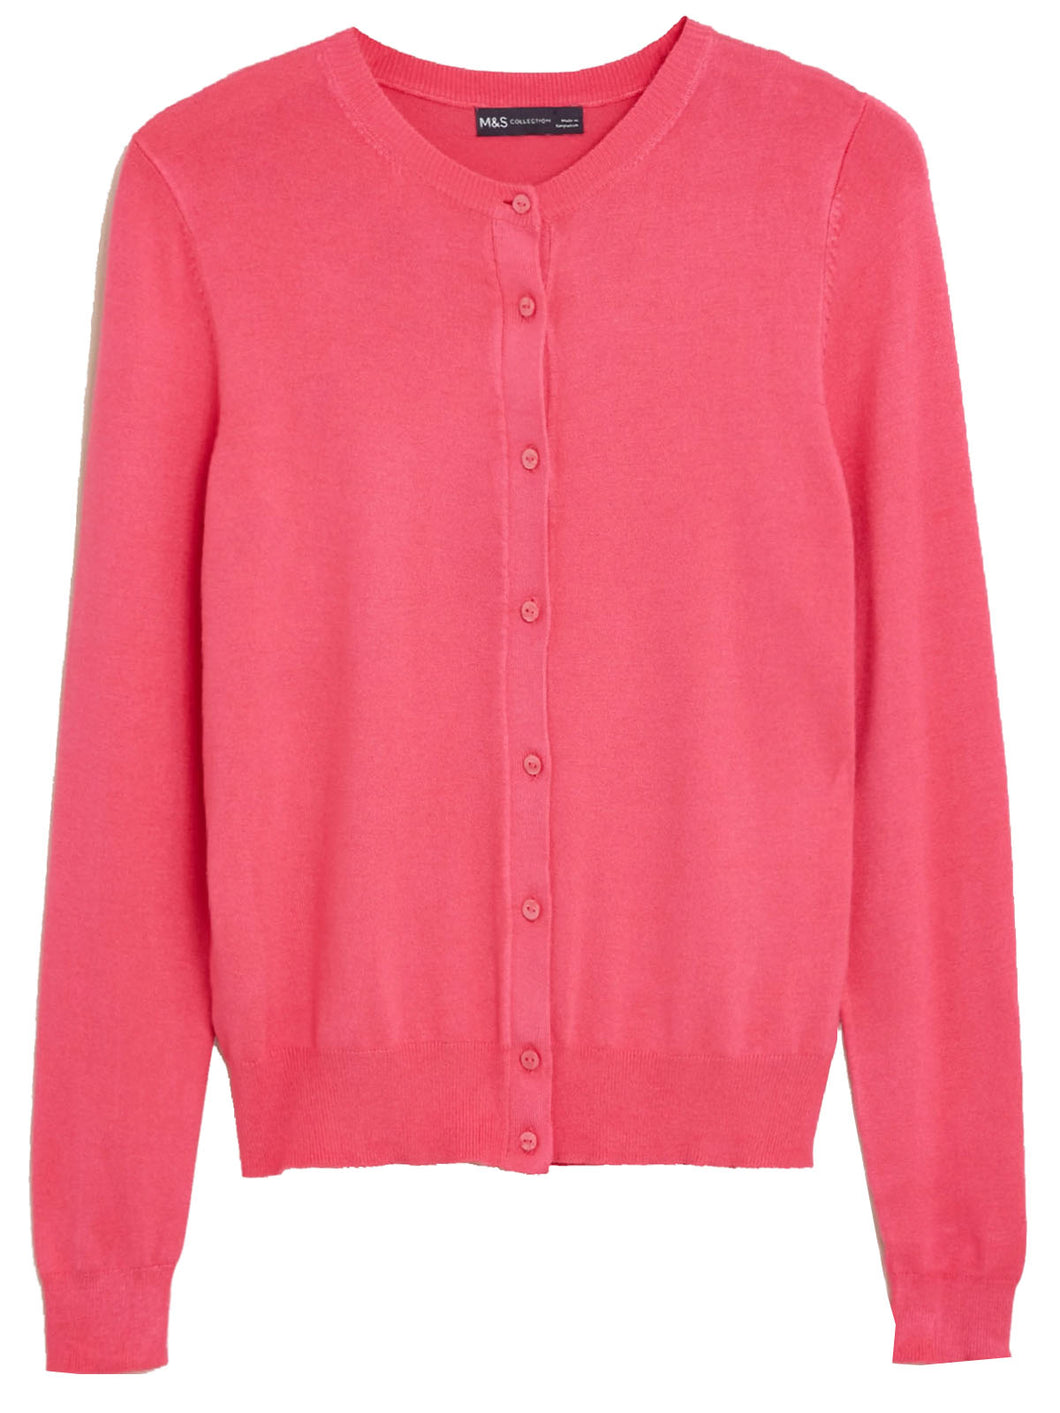 Ladies Hot Pink Soft Knit Crew Neck Button Down Cardigan